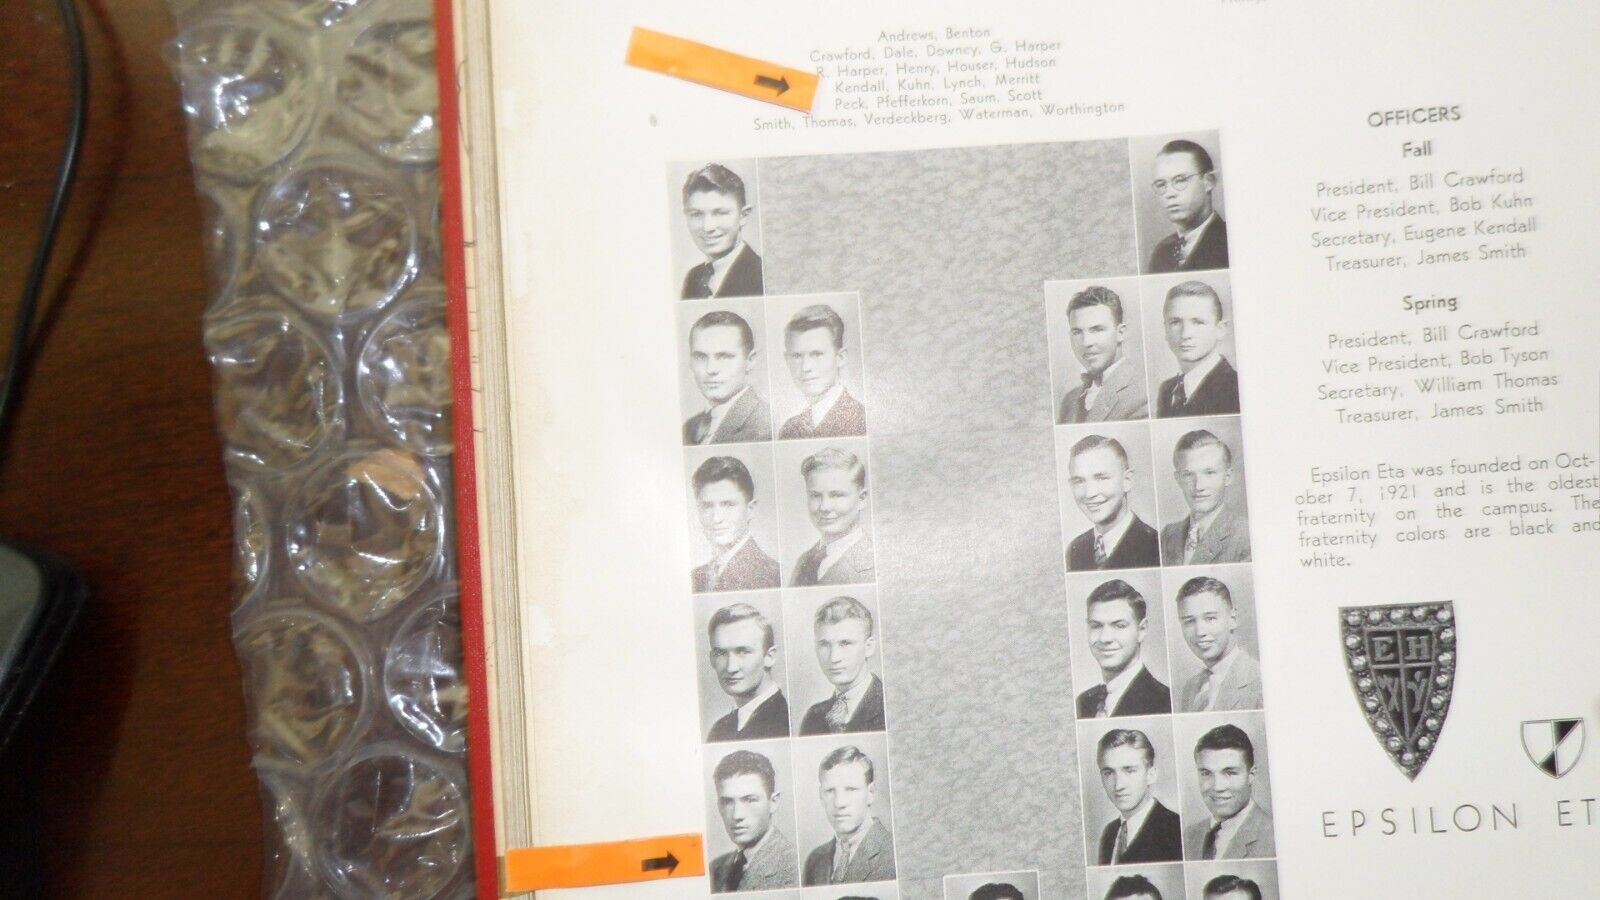 GREGORY PECK/ACTOR/ORIGINAL 1936 SAN DIEGO STATE COLLEGE YEARBOOK/SAN DIEGO, CAL